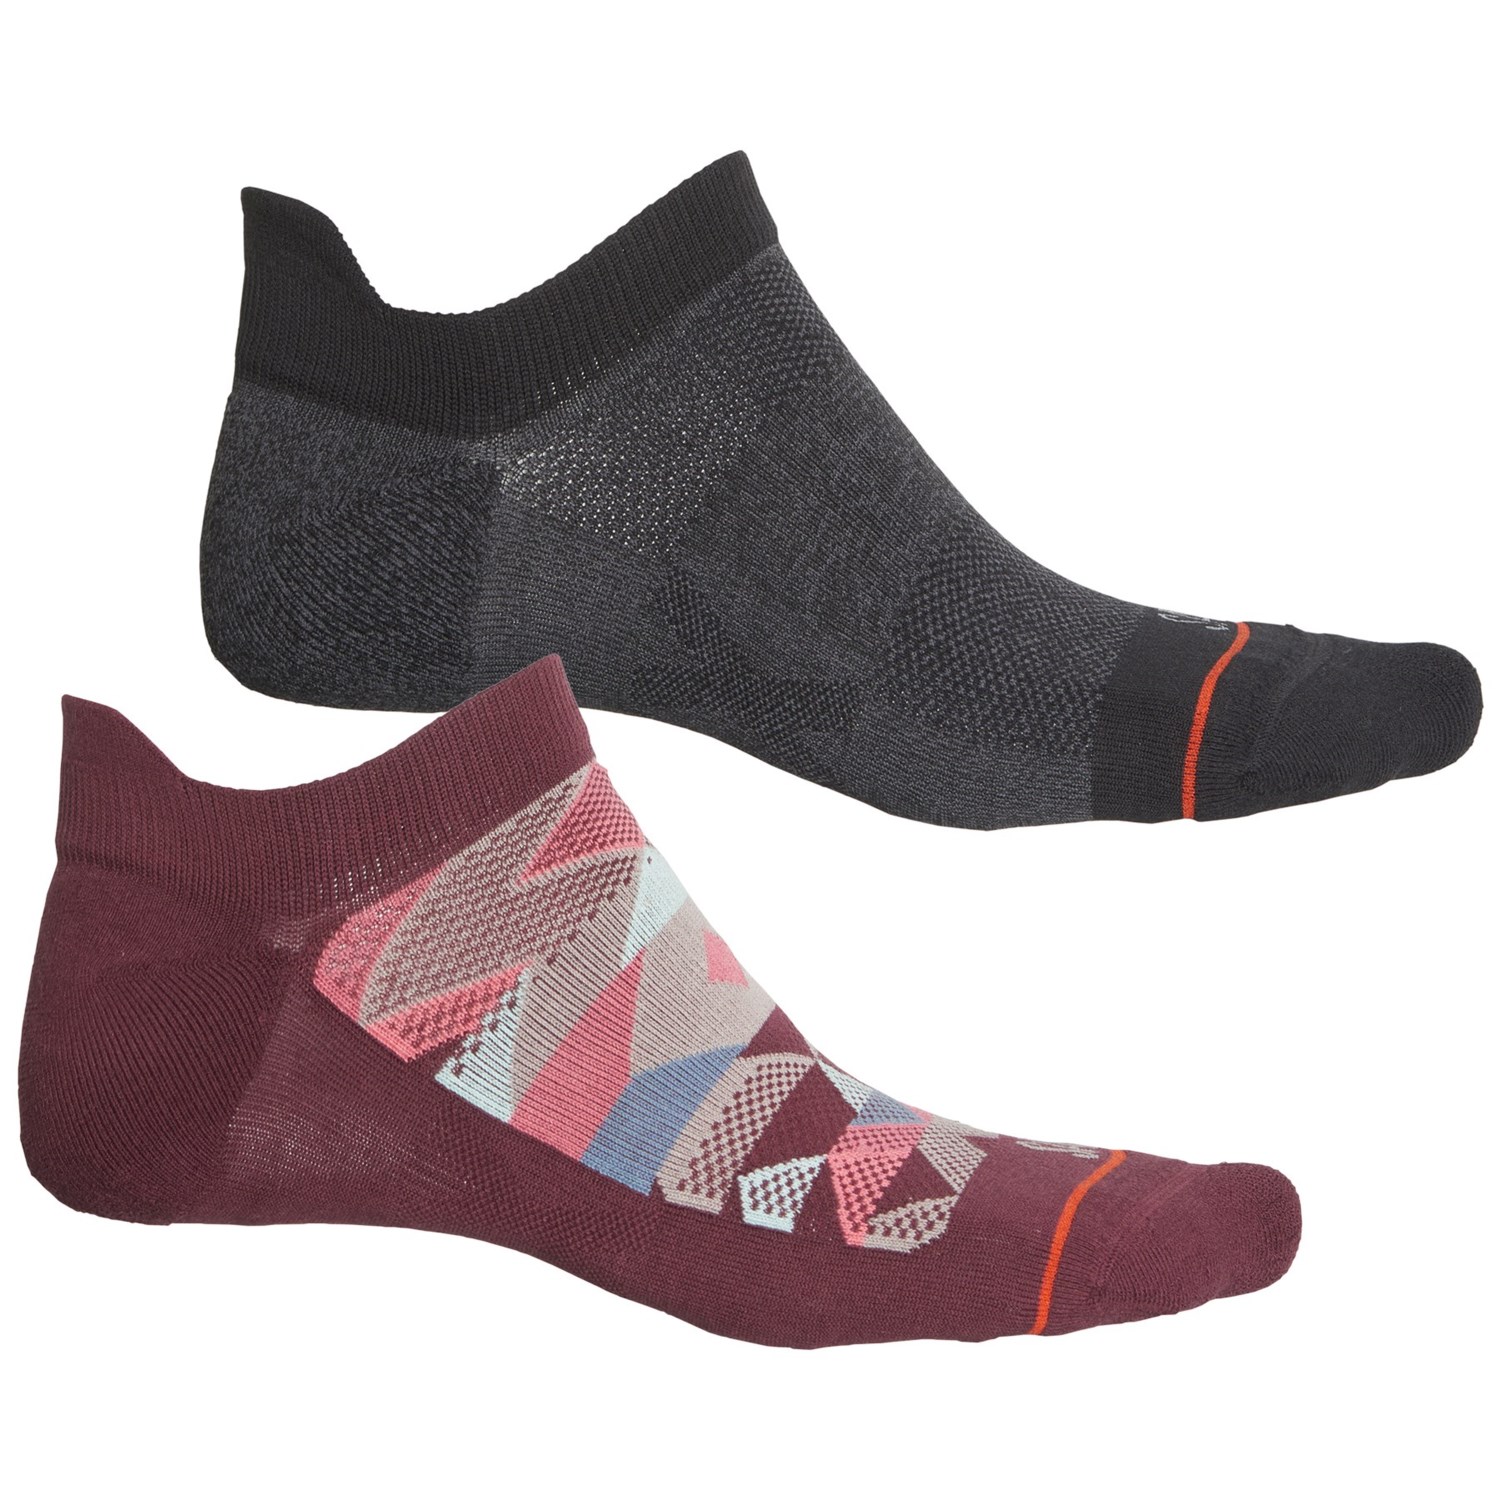 SAXX Whole Package Low-Show Socks - 2-Pack, Below the Ankle (For Men)